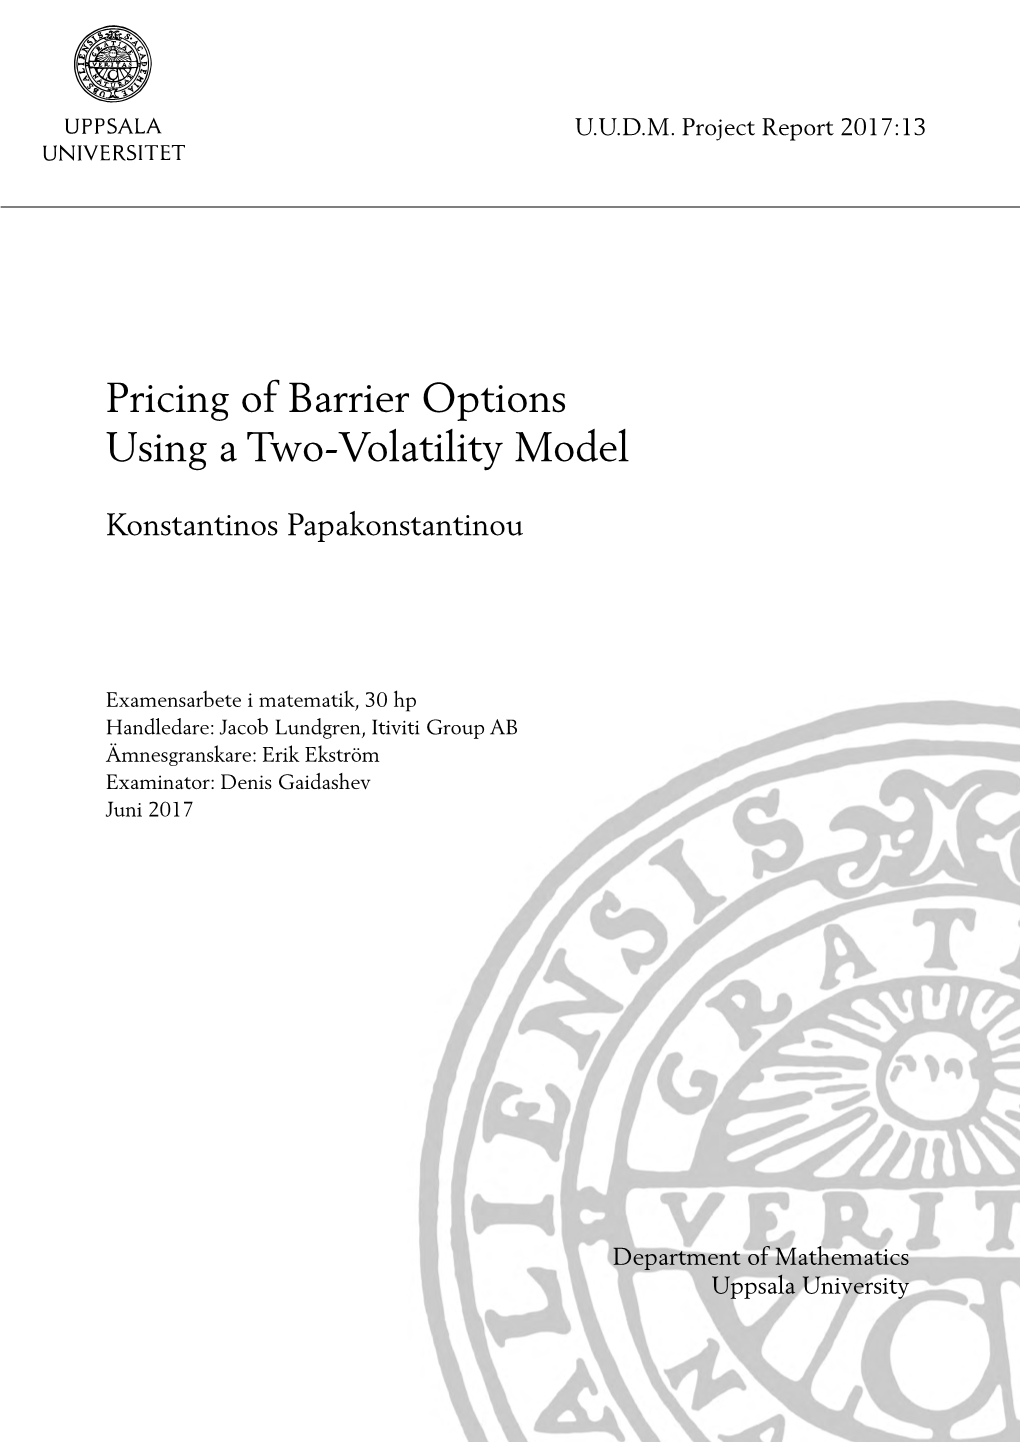 Pricing of Barrier Options Using a Two-Volatility Model